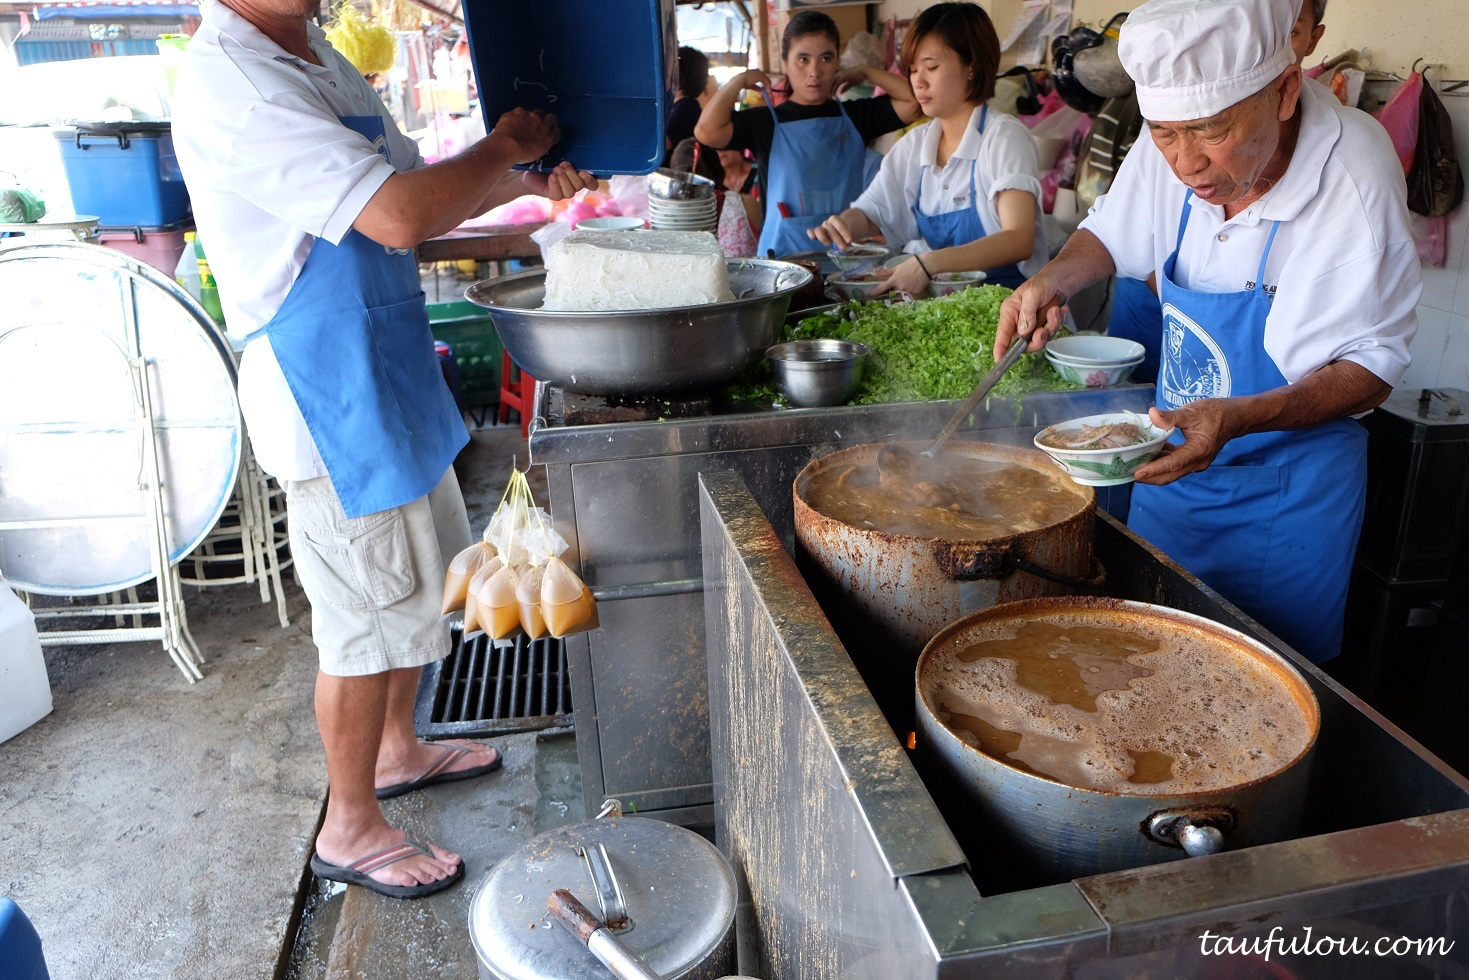 4 malaysia cuisine included in top 50 asia's best street food by cnn travel